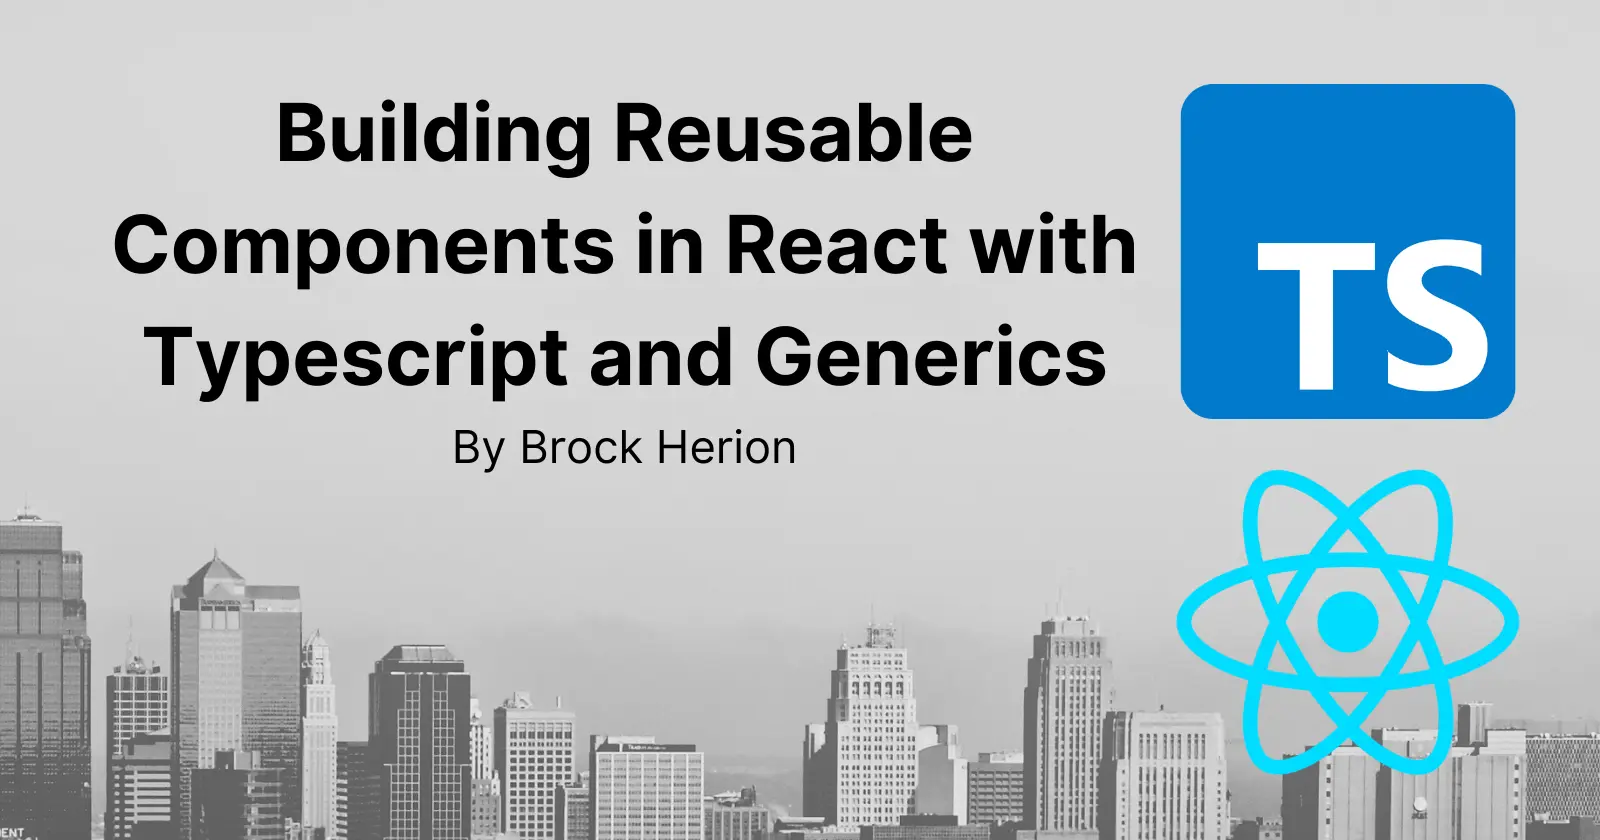 Building Reusable Components in React with Typescript and Generics